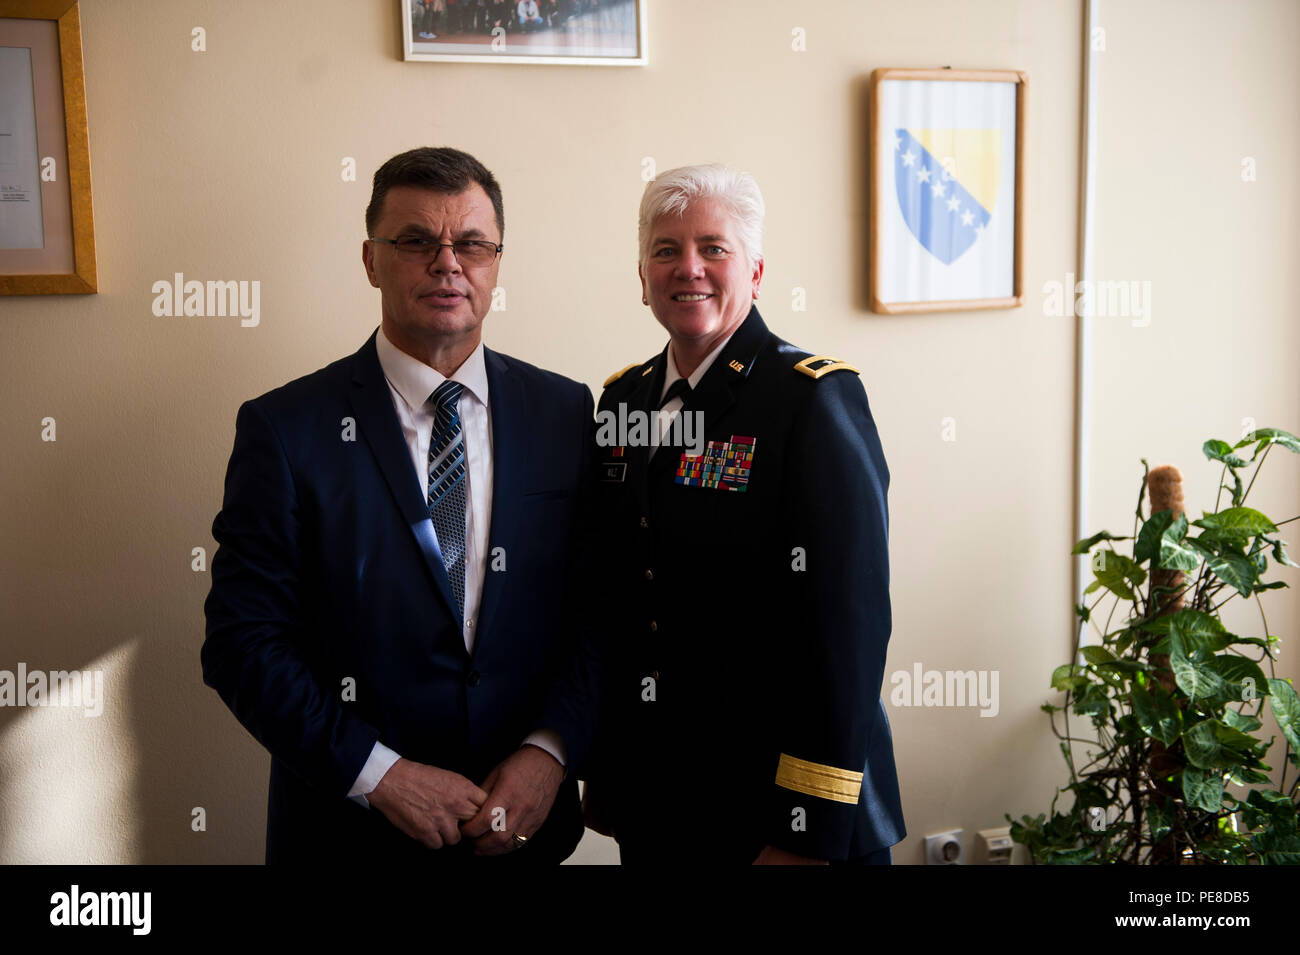 U.S. Army Brig. Gen. Giselle Wilz, NATO Headquarters Sarajevo commander, poses with Dr. Izudin Hasanovic, the dean of University of Tuzla's Faculty of Law, during a visit to Tuzla, Bosnia and Herzegovina Oct. 26, 2015. Wilz visited the university to meet with students and spoke about NATO and NHQSa’s mission. (U.S. Air Force photo by Staff Sgt. Clayton Lenhardt/Released) Stock Photo